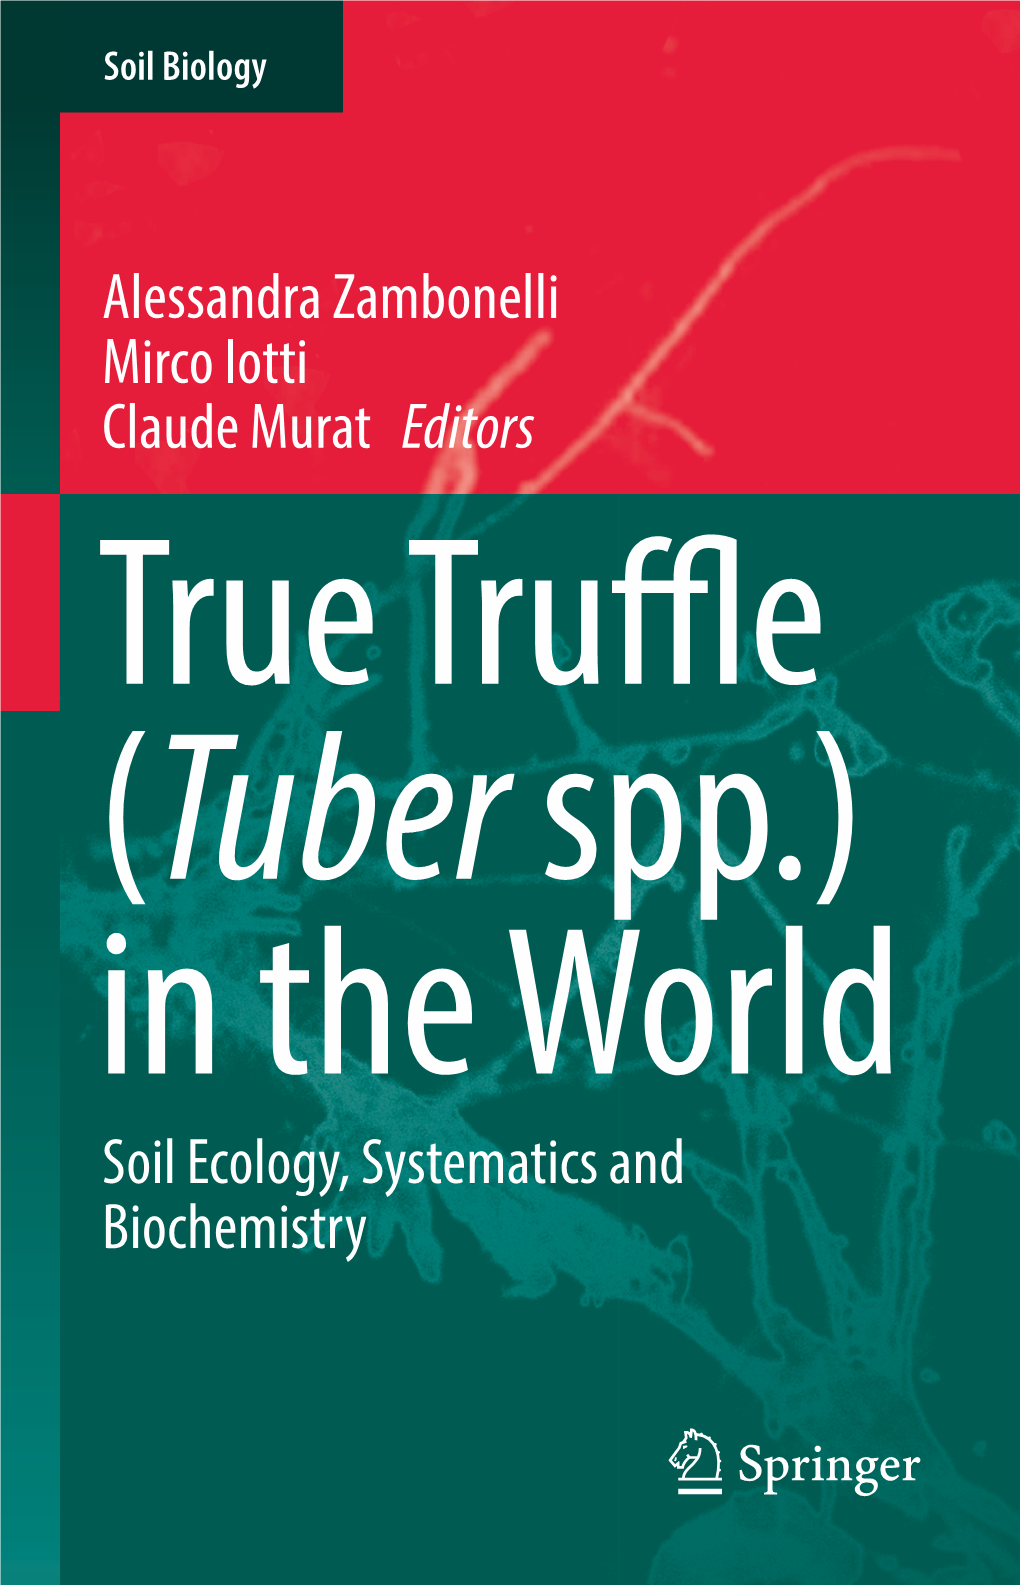 Tuber Spp.) in the World Soil Ecology, Systematics and Biochemistry Soil Biology